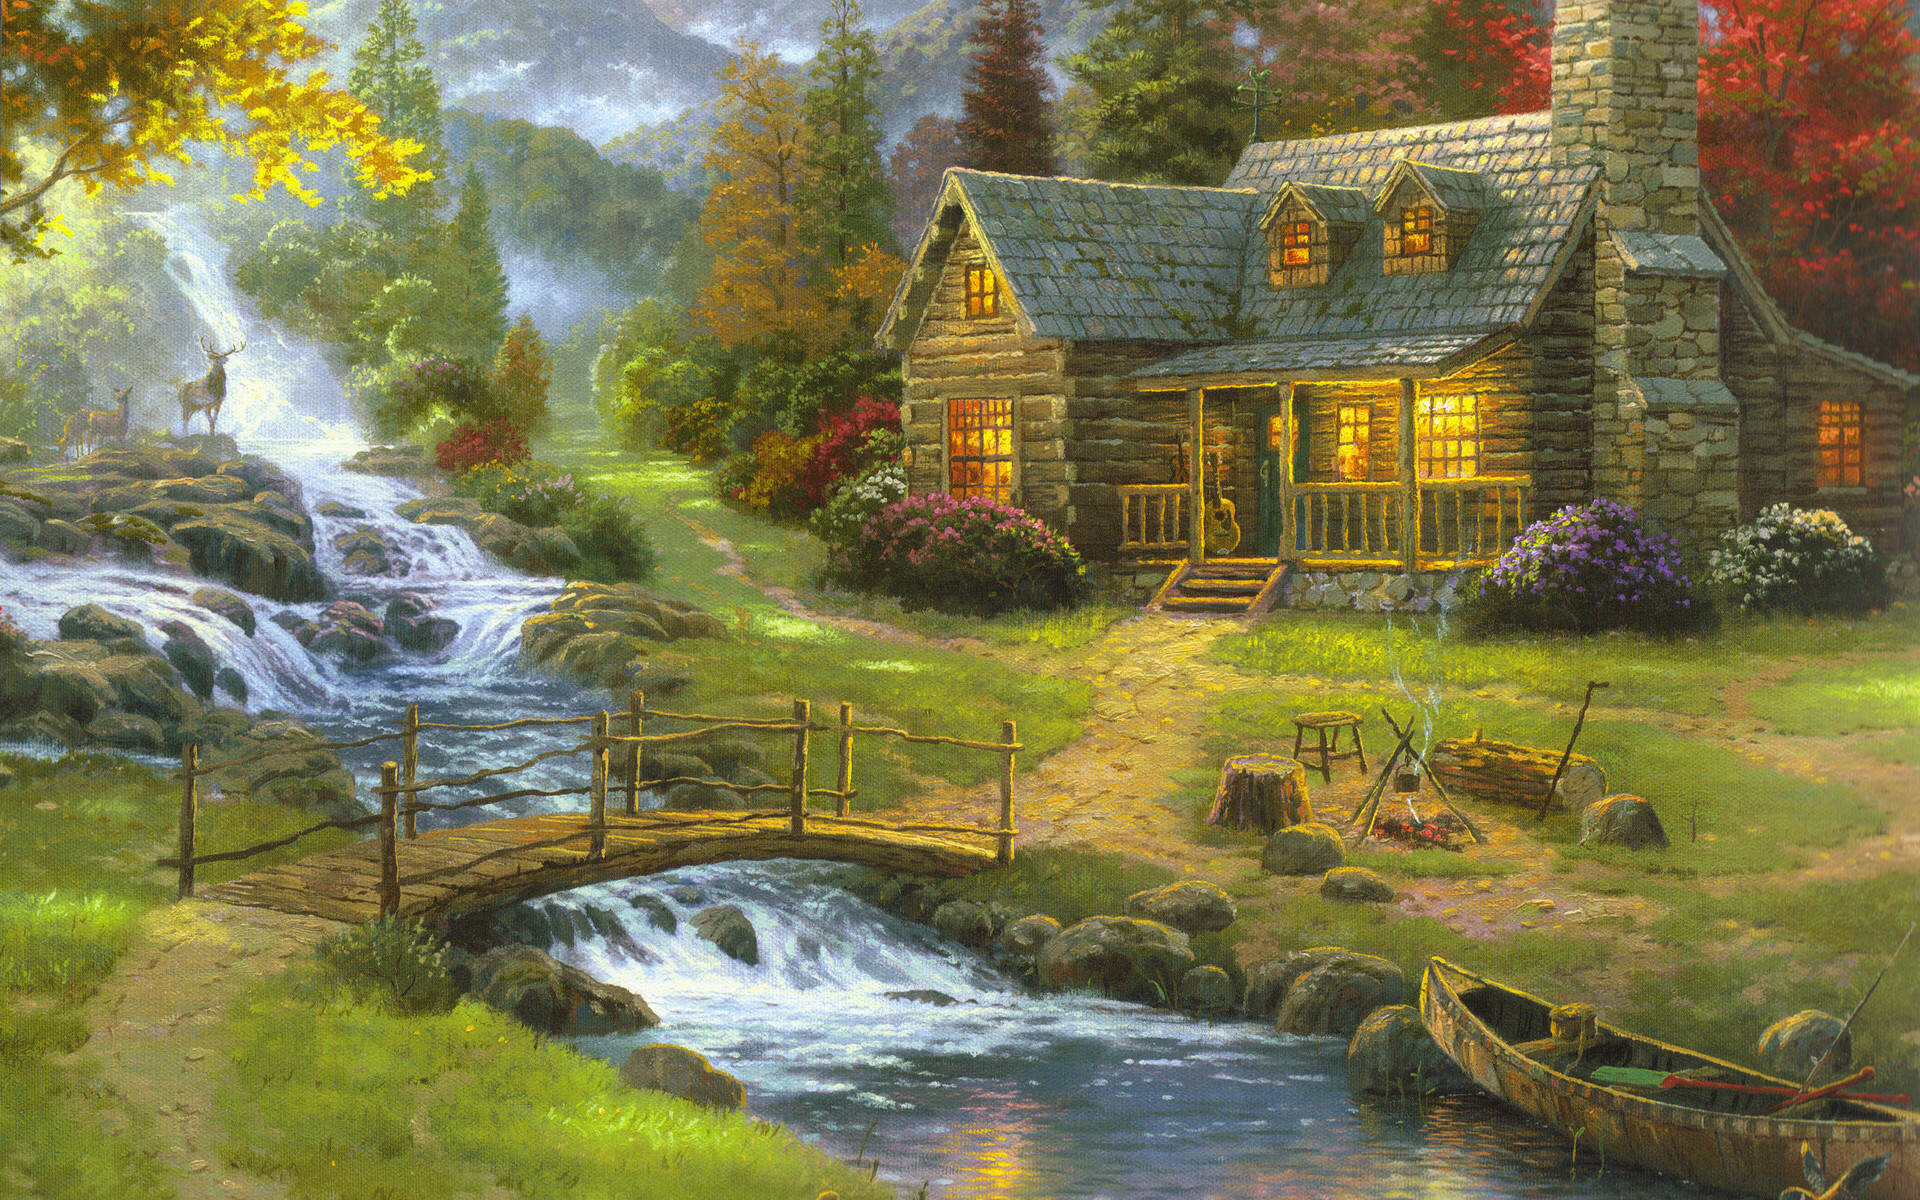 1920x1200 Thomas Kinkade Mountain Paradise painting is shipped worldwide,including  stretched canvas and framed art.This Thomas Kinkade Mountain Paradise  painting is ...